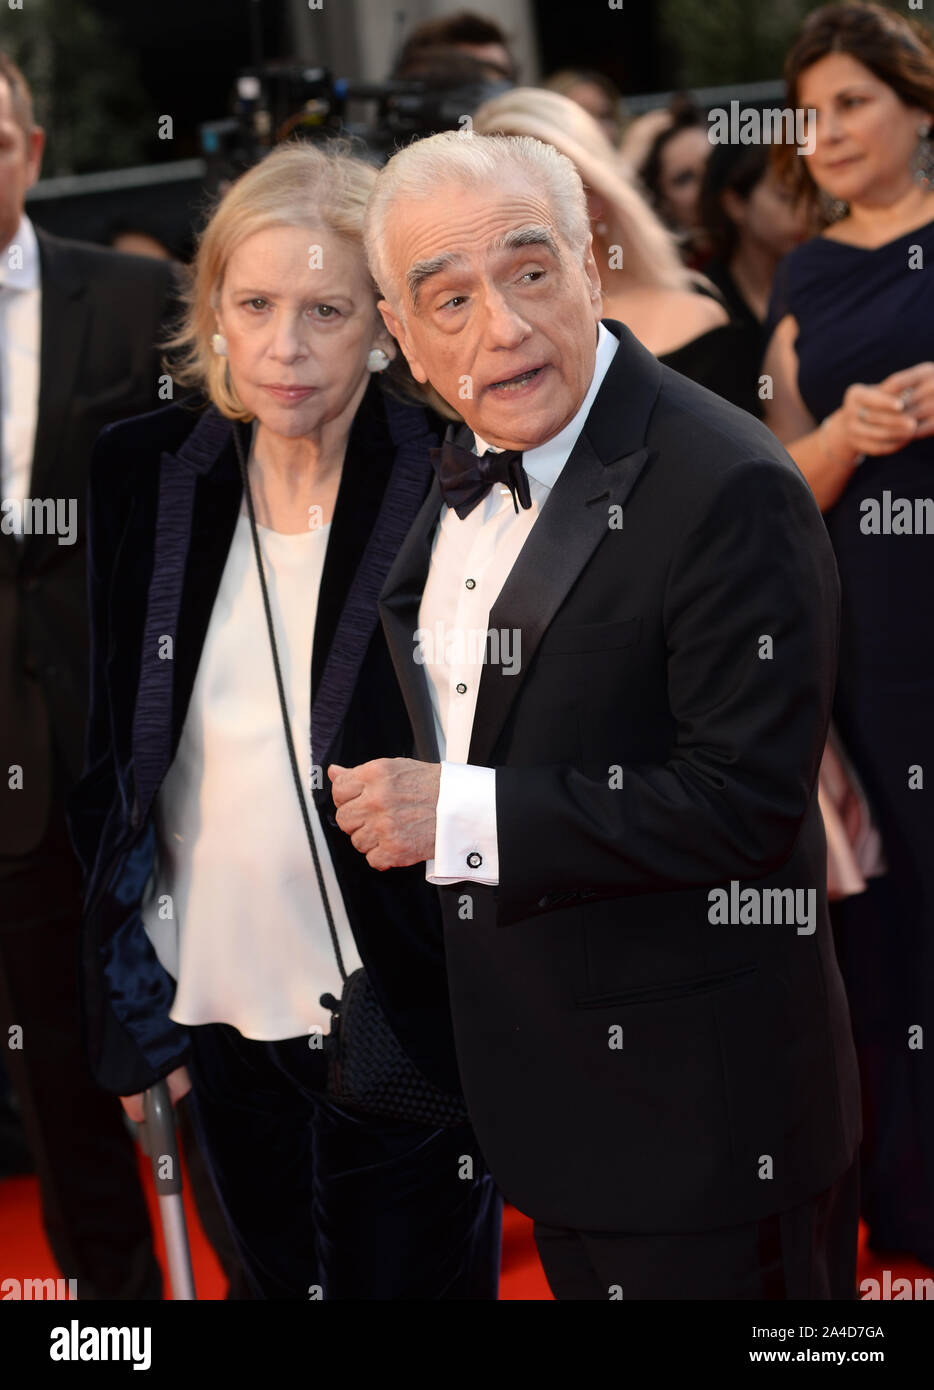 Photo Must Be Credited ©Alpha Press 078237 13/10/2019 Martin Scorsese and wife Helen Morris The Irishman Premiere Closing Night Gala during the 63rd BFI LFF London Film Festival 2019 in London Stock Photo